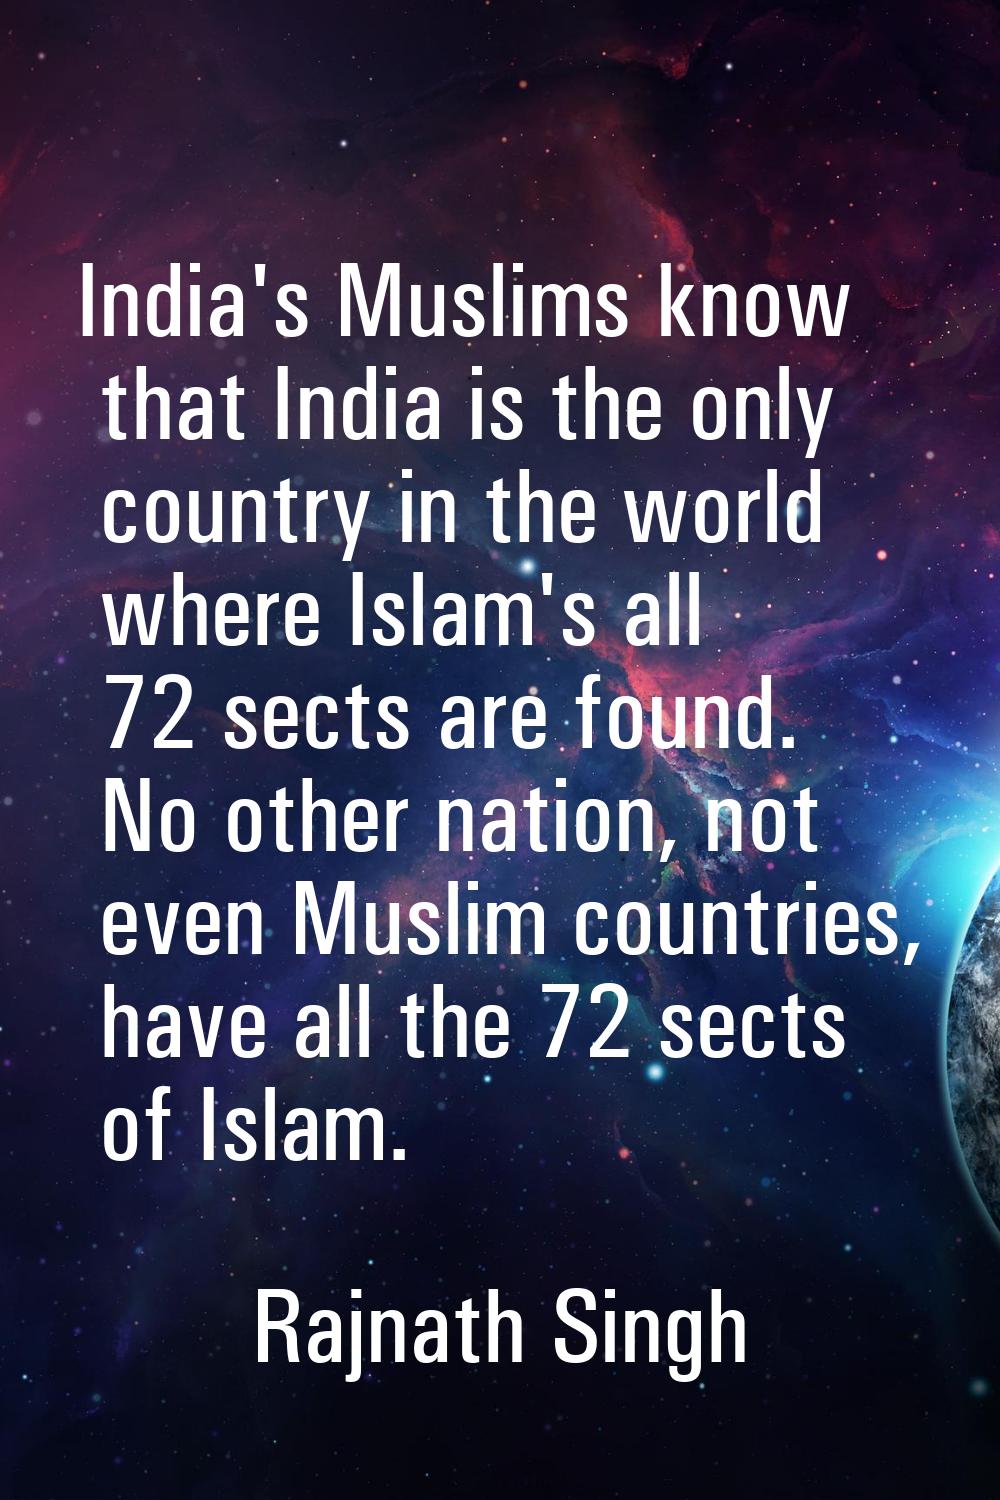 India's Muslims know that India is the only country in the world where Islam's all 72 sects are fou